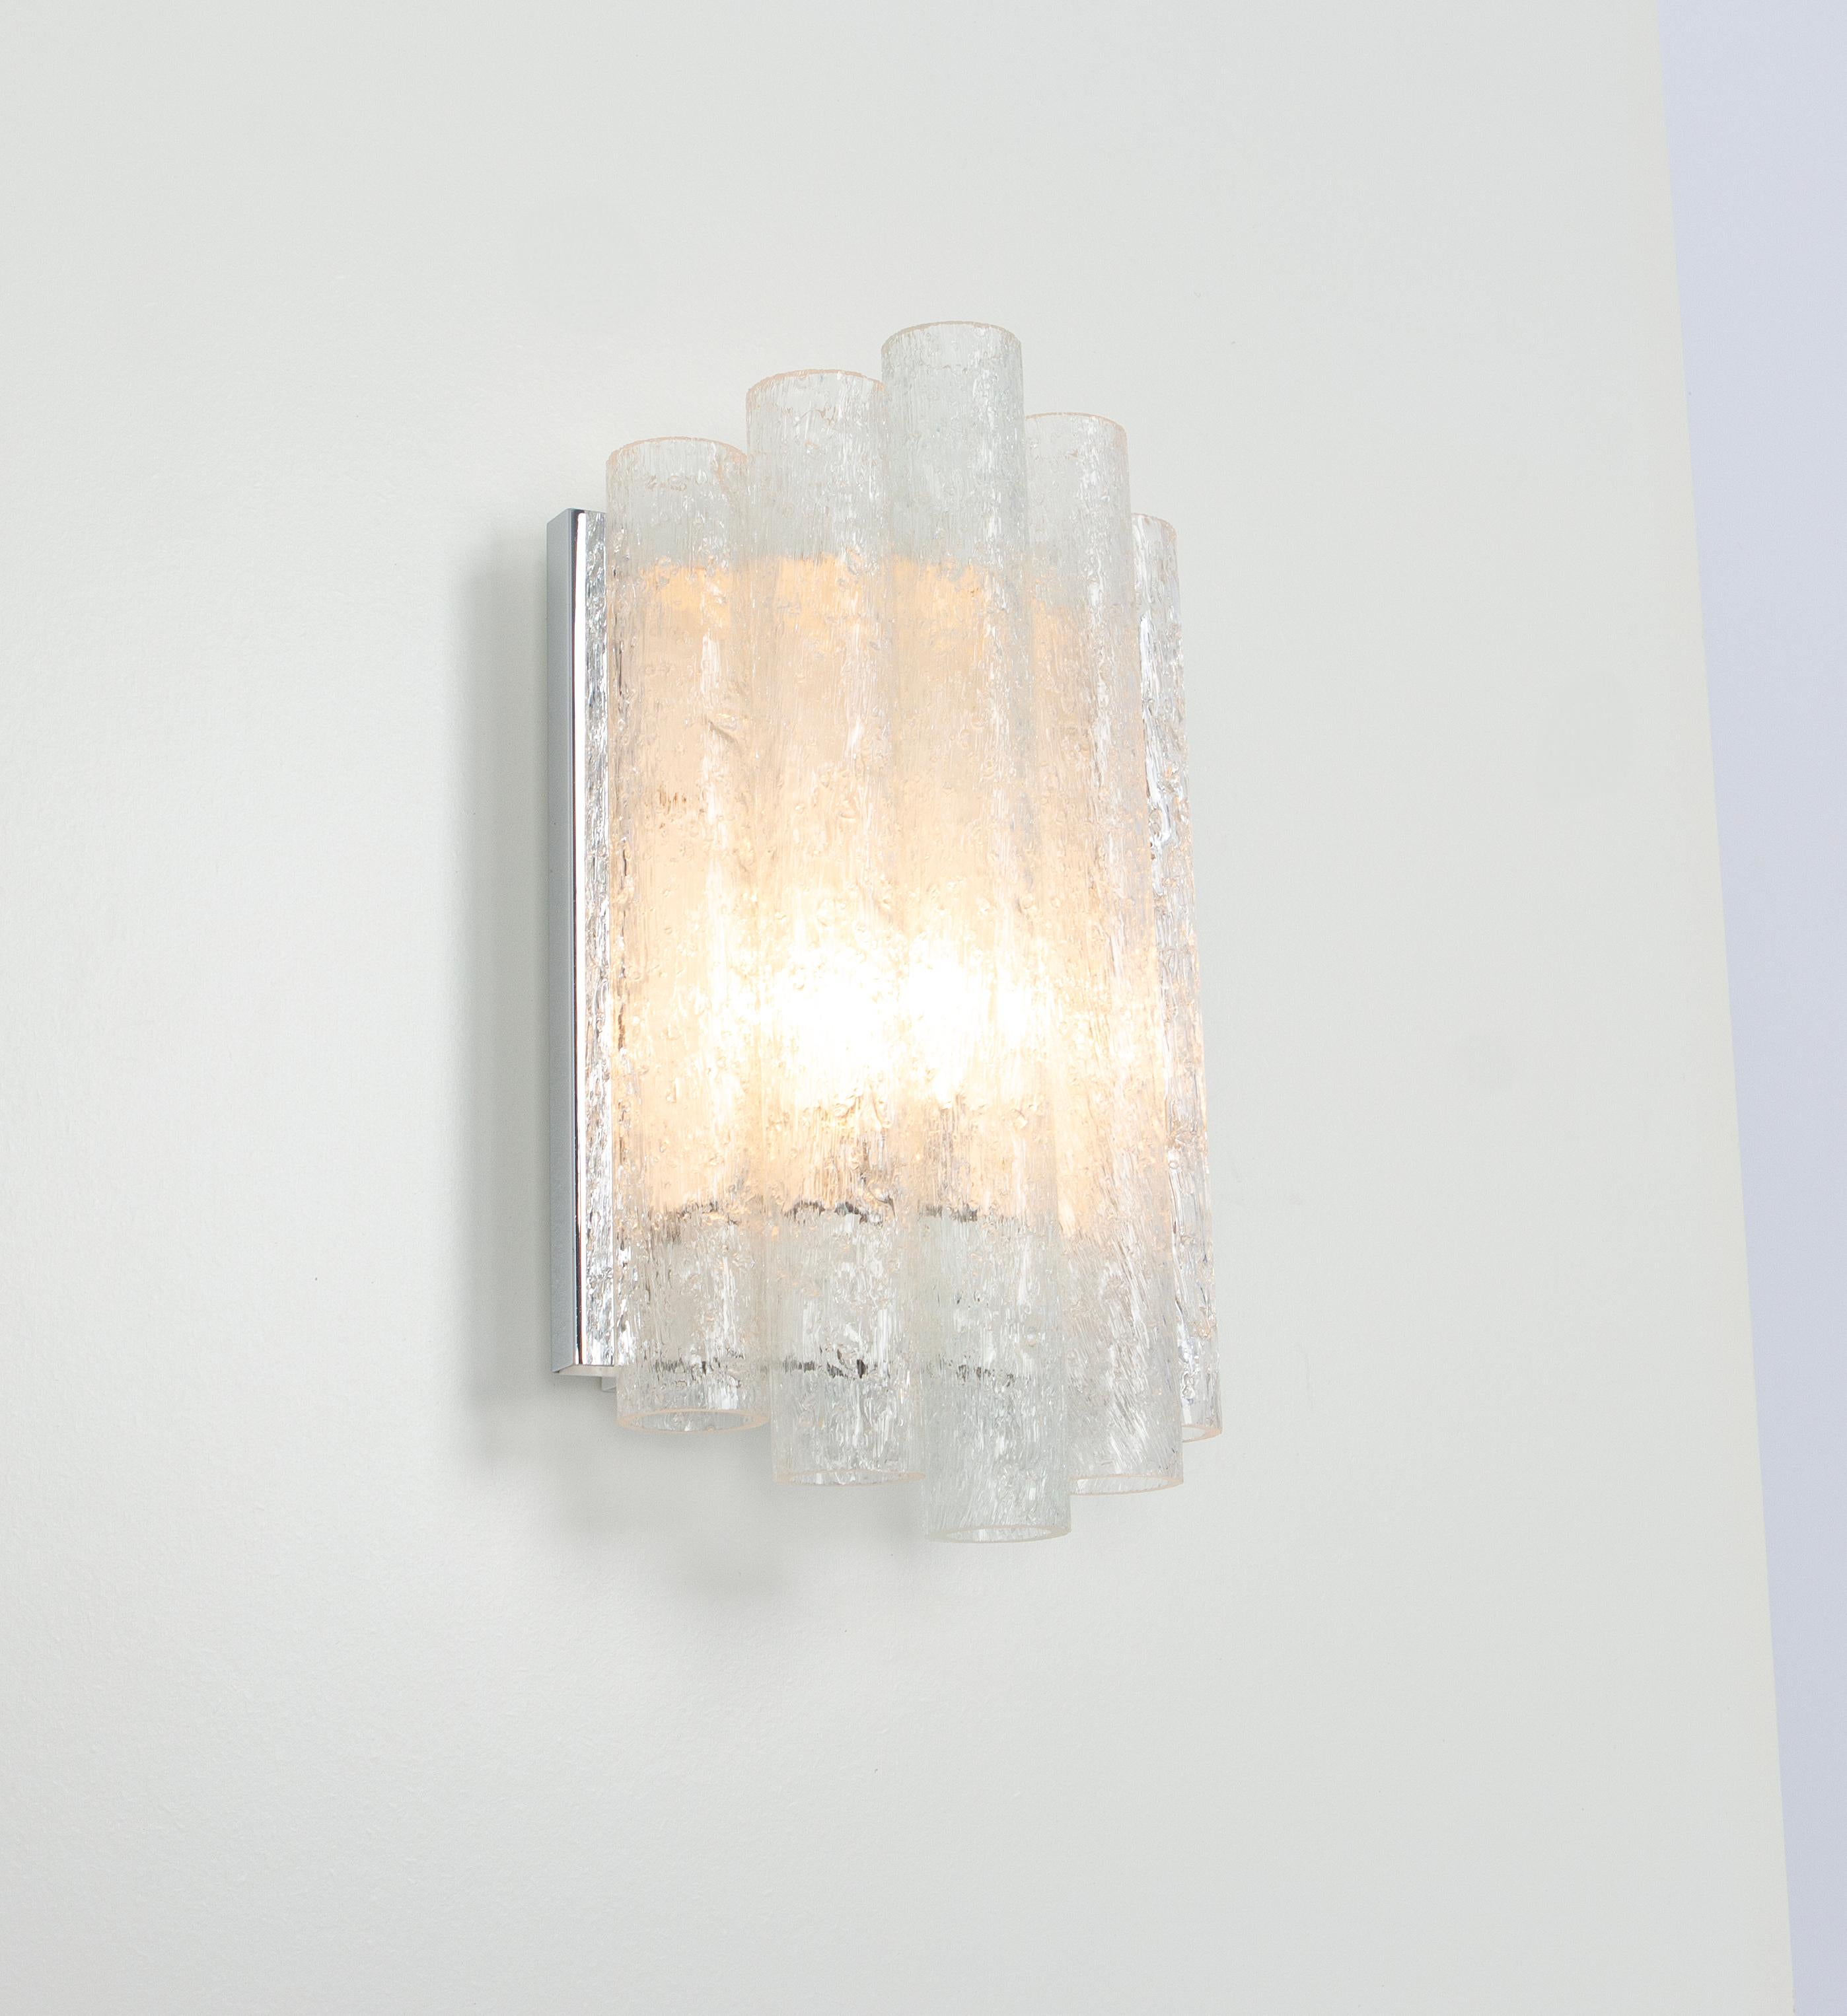 Pair of  Wonderful mid-century wall sconces with ice glass tubes, made by Doria Leuchten, Germany, manufactured, circa 1960-1969.

High quality and in very good condition. Cleaned, well-wired and ready to use. 

Each sconce requires 1 x E14 small